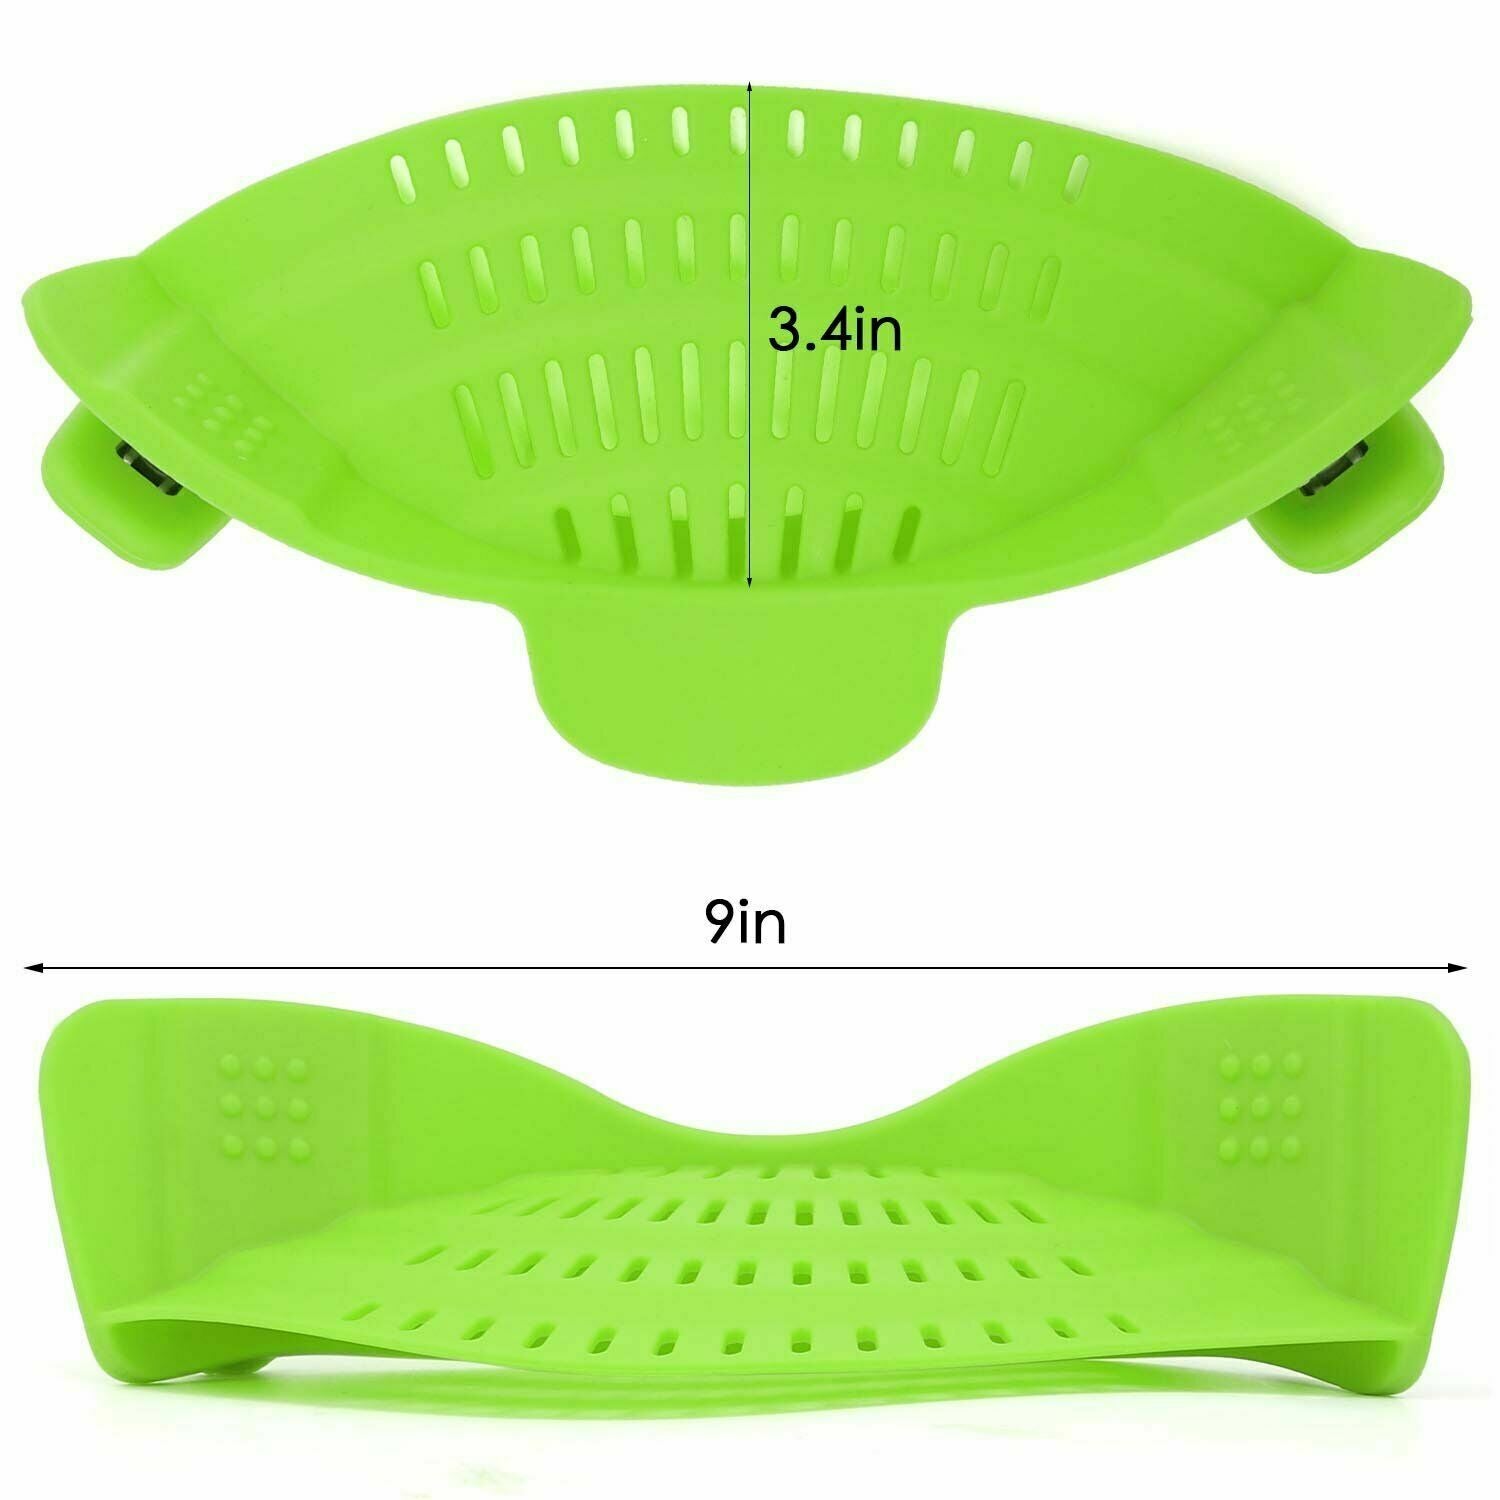 Snap on Strainer, Hands Free, Heat Resistant Silicone Colander